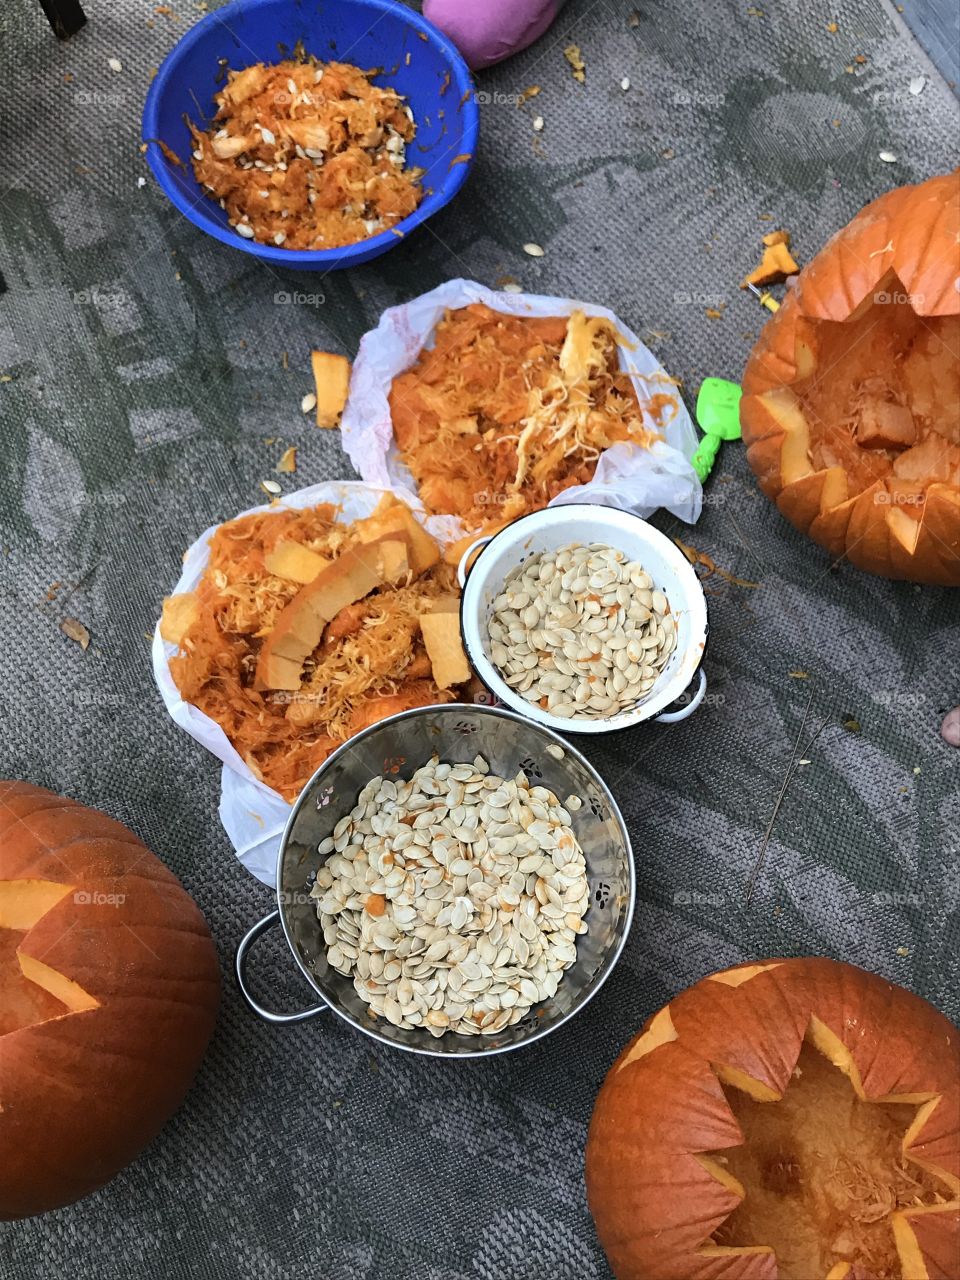 Pumpkin seeds and carving 